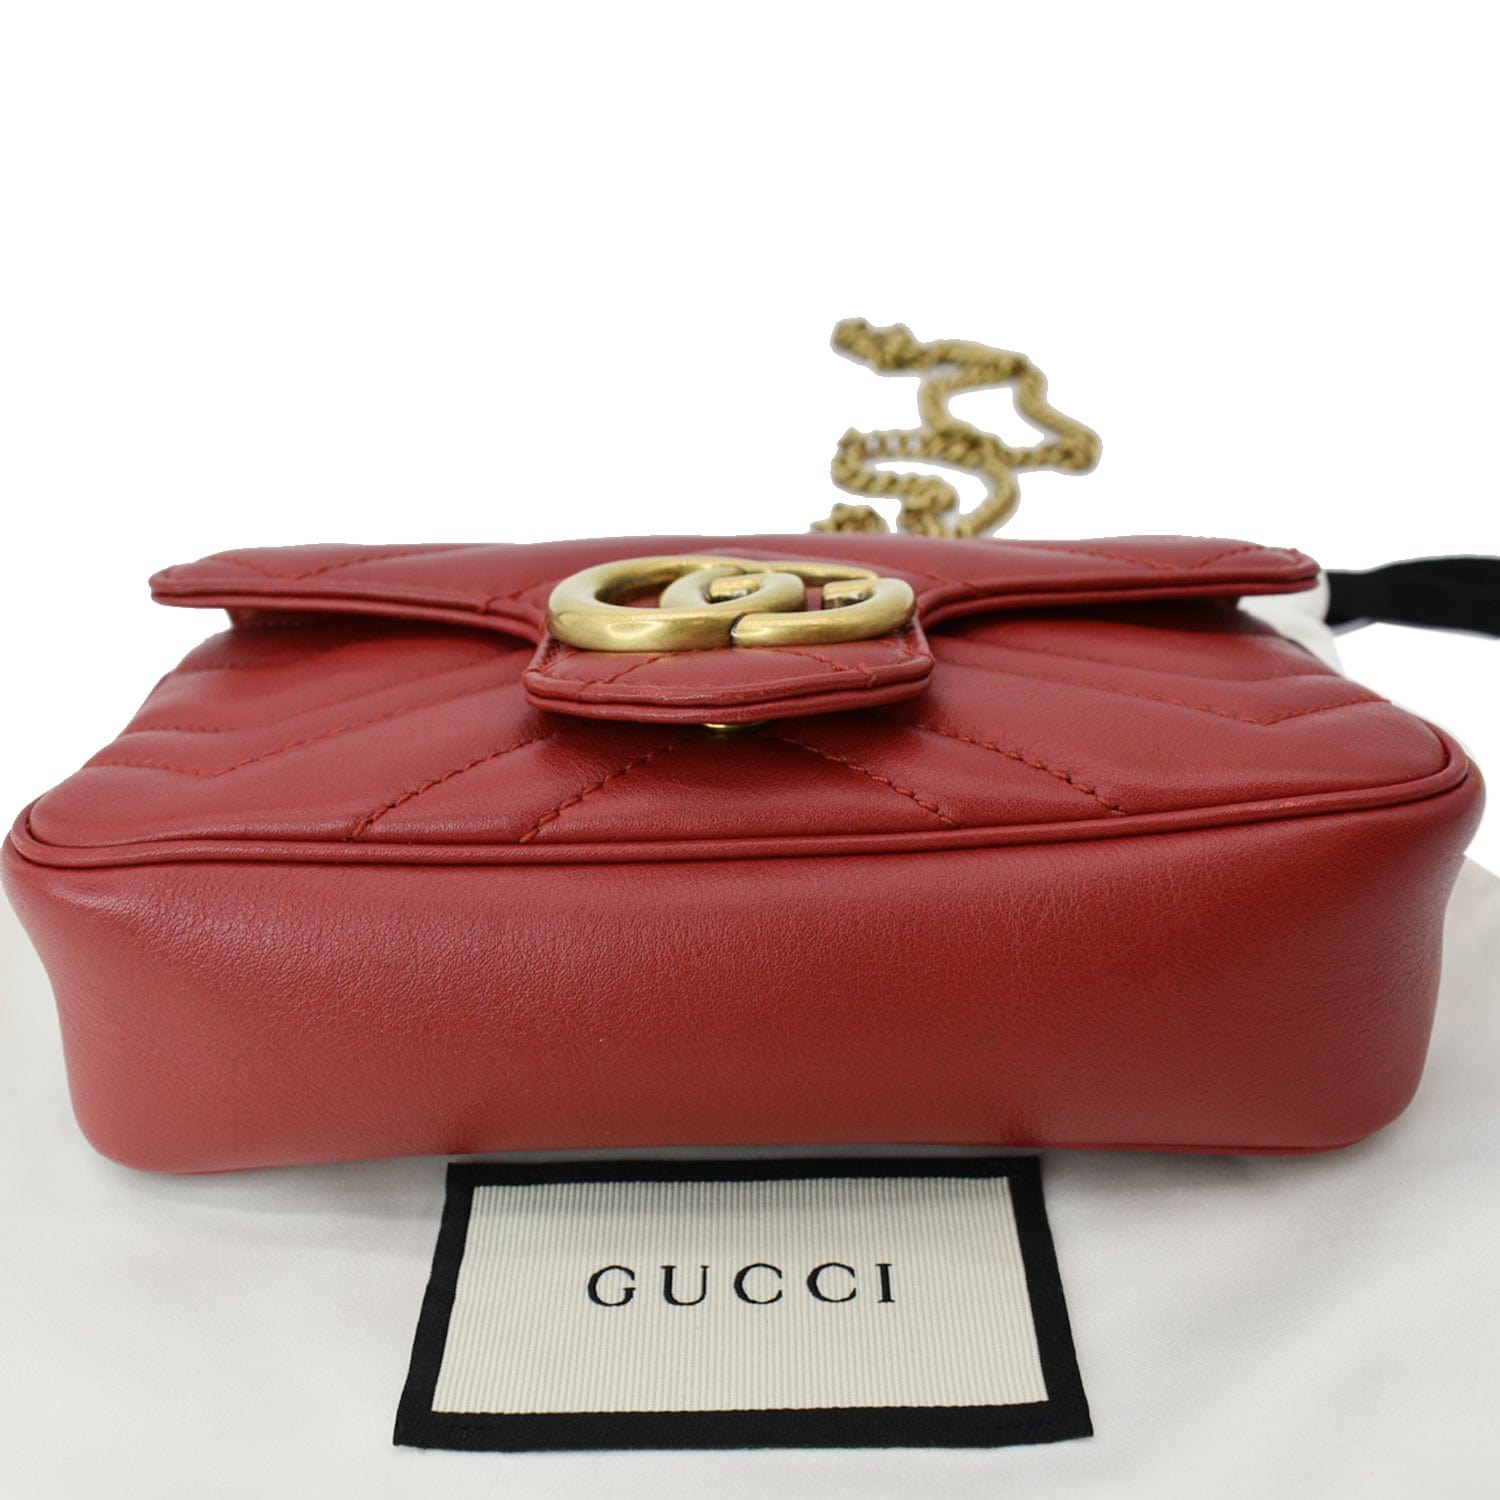 Gucci Red Quilted Calfskin Leather GG Marmont Super Mini Crossbody Bag